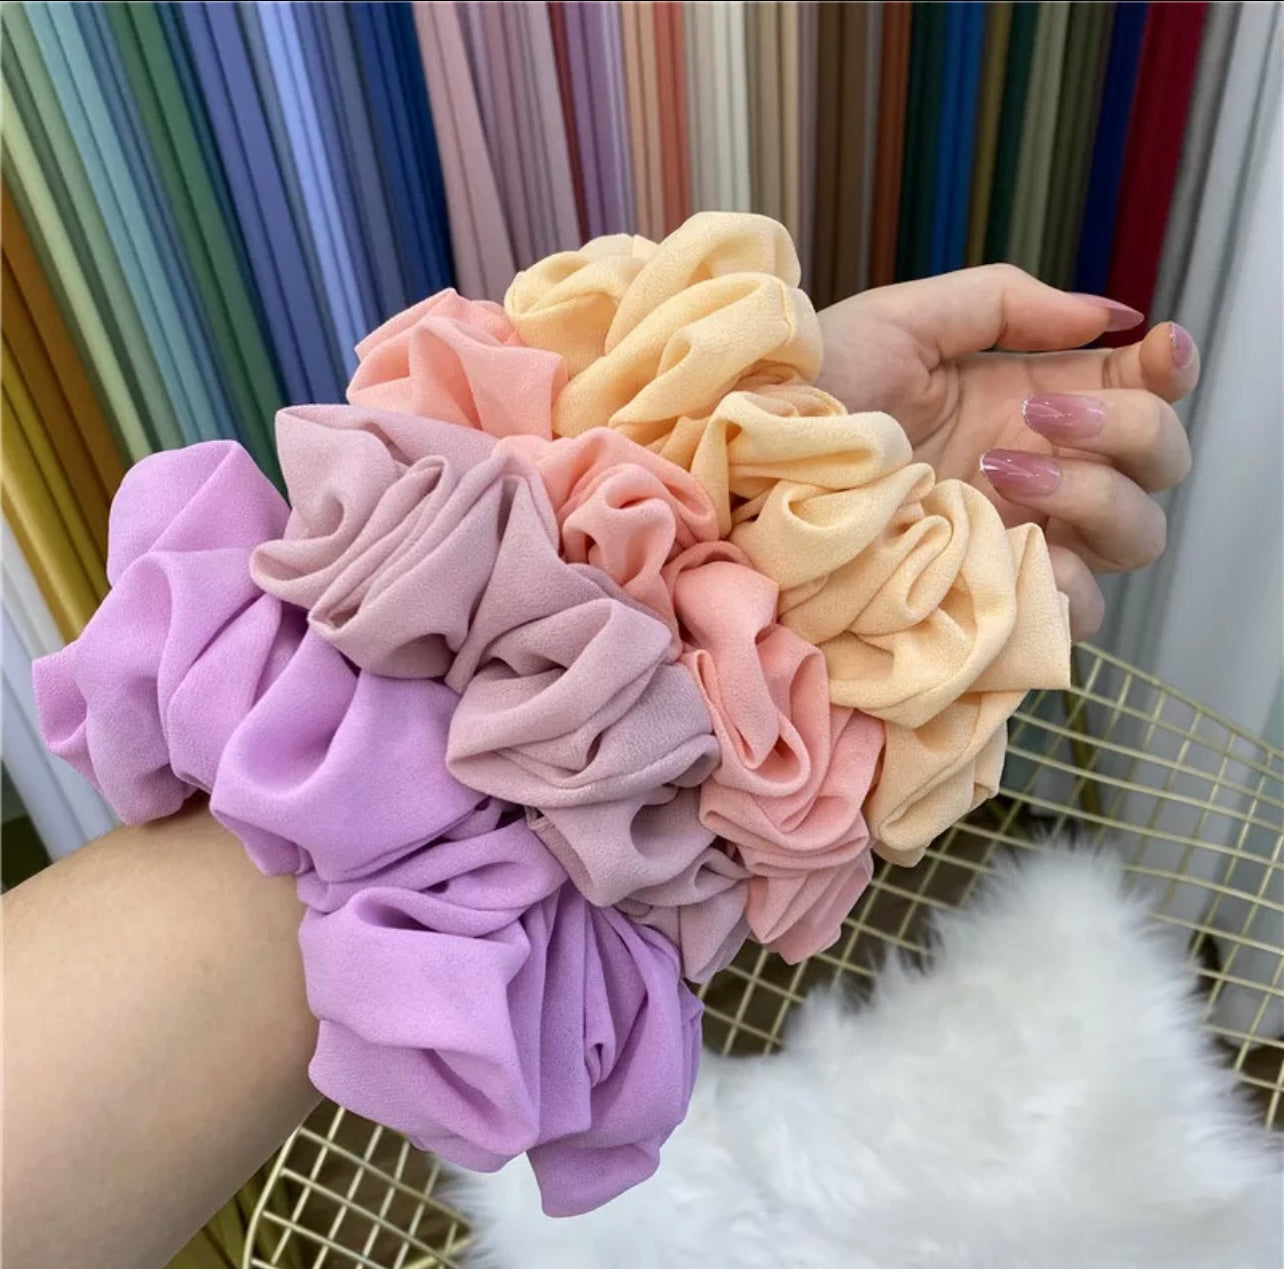 Large chiffon Scrunchy, Picture of Product on Wrist